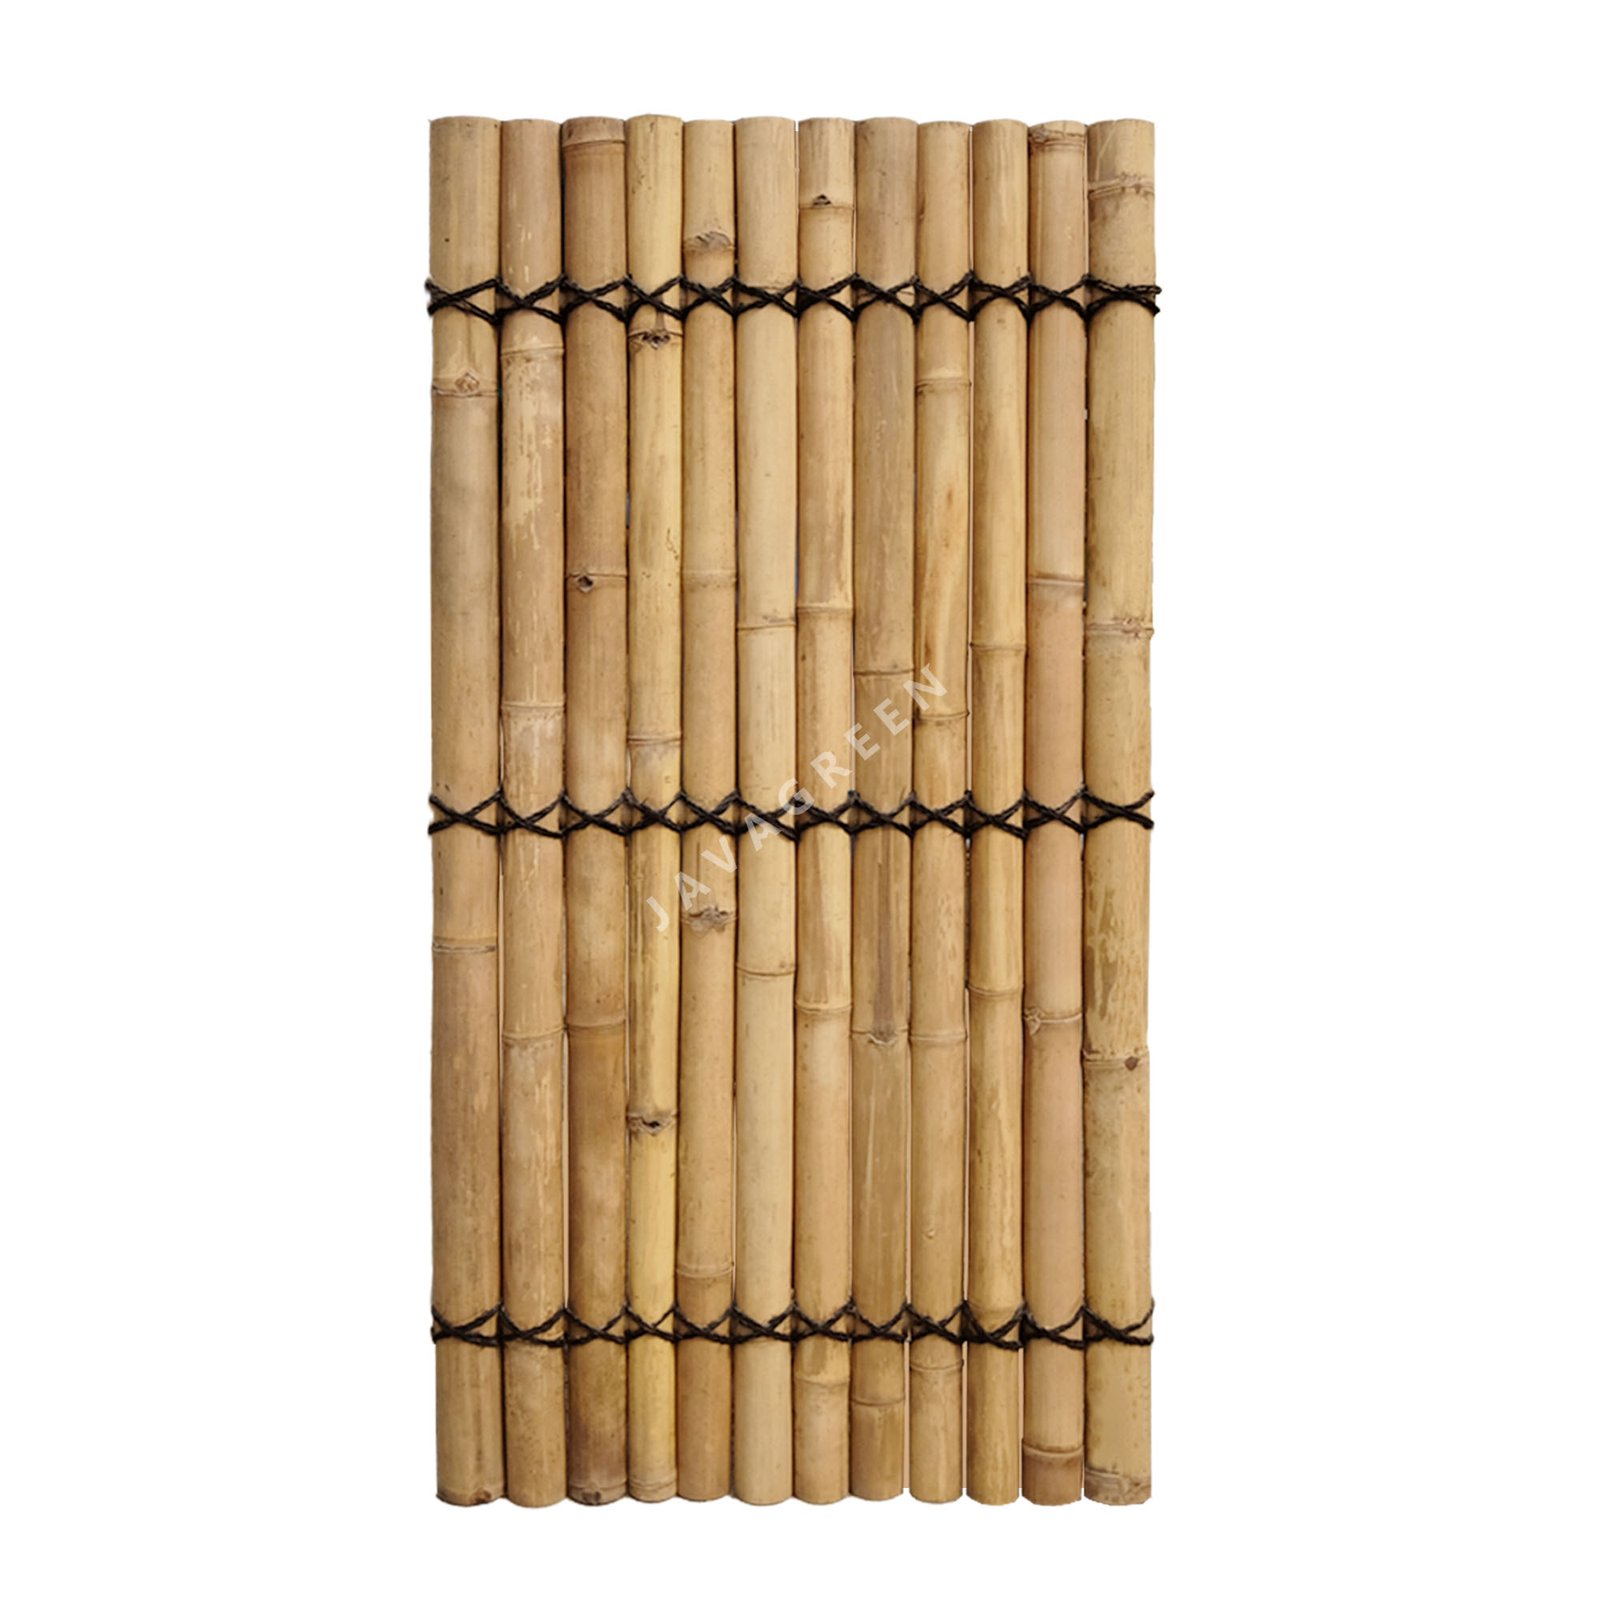 Halved bamboo fence w/ black rope